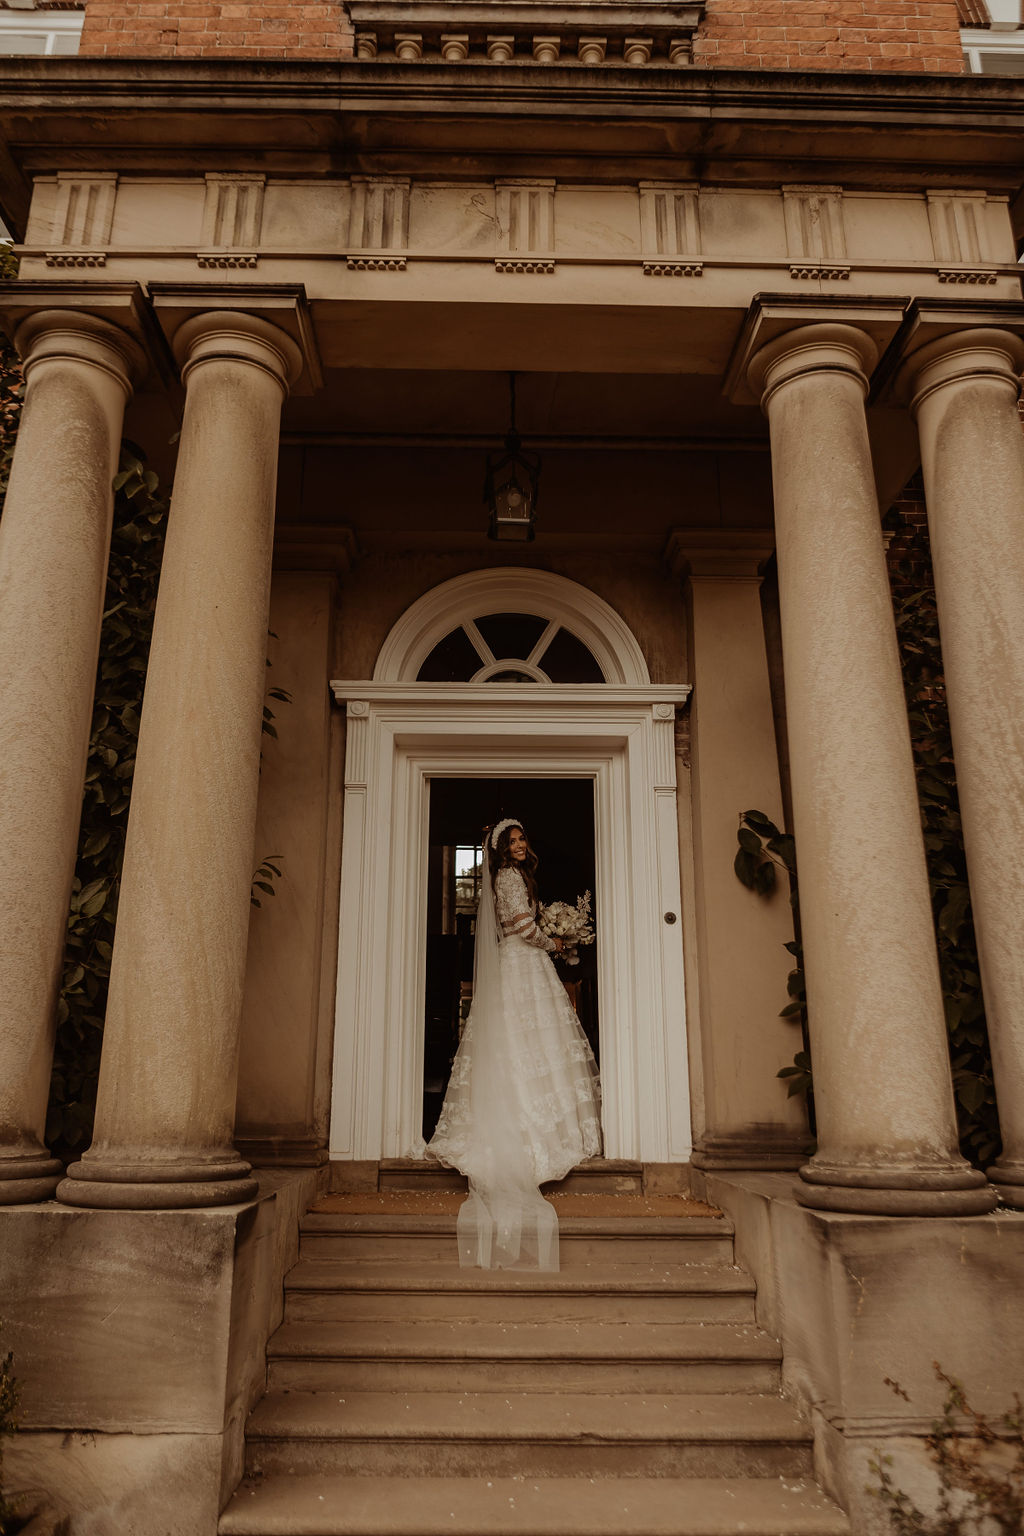 Rustic September Wedding Inspiration at Luxury Wedding Venue Iscoyd Park with Black Tie photographed by Esme Whiteside